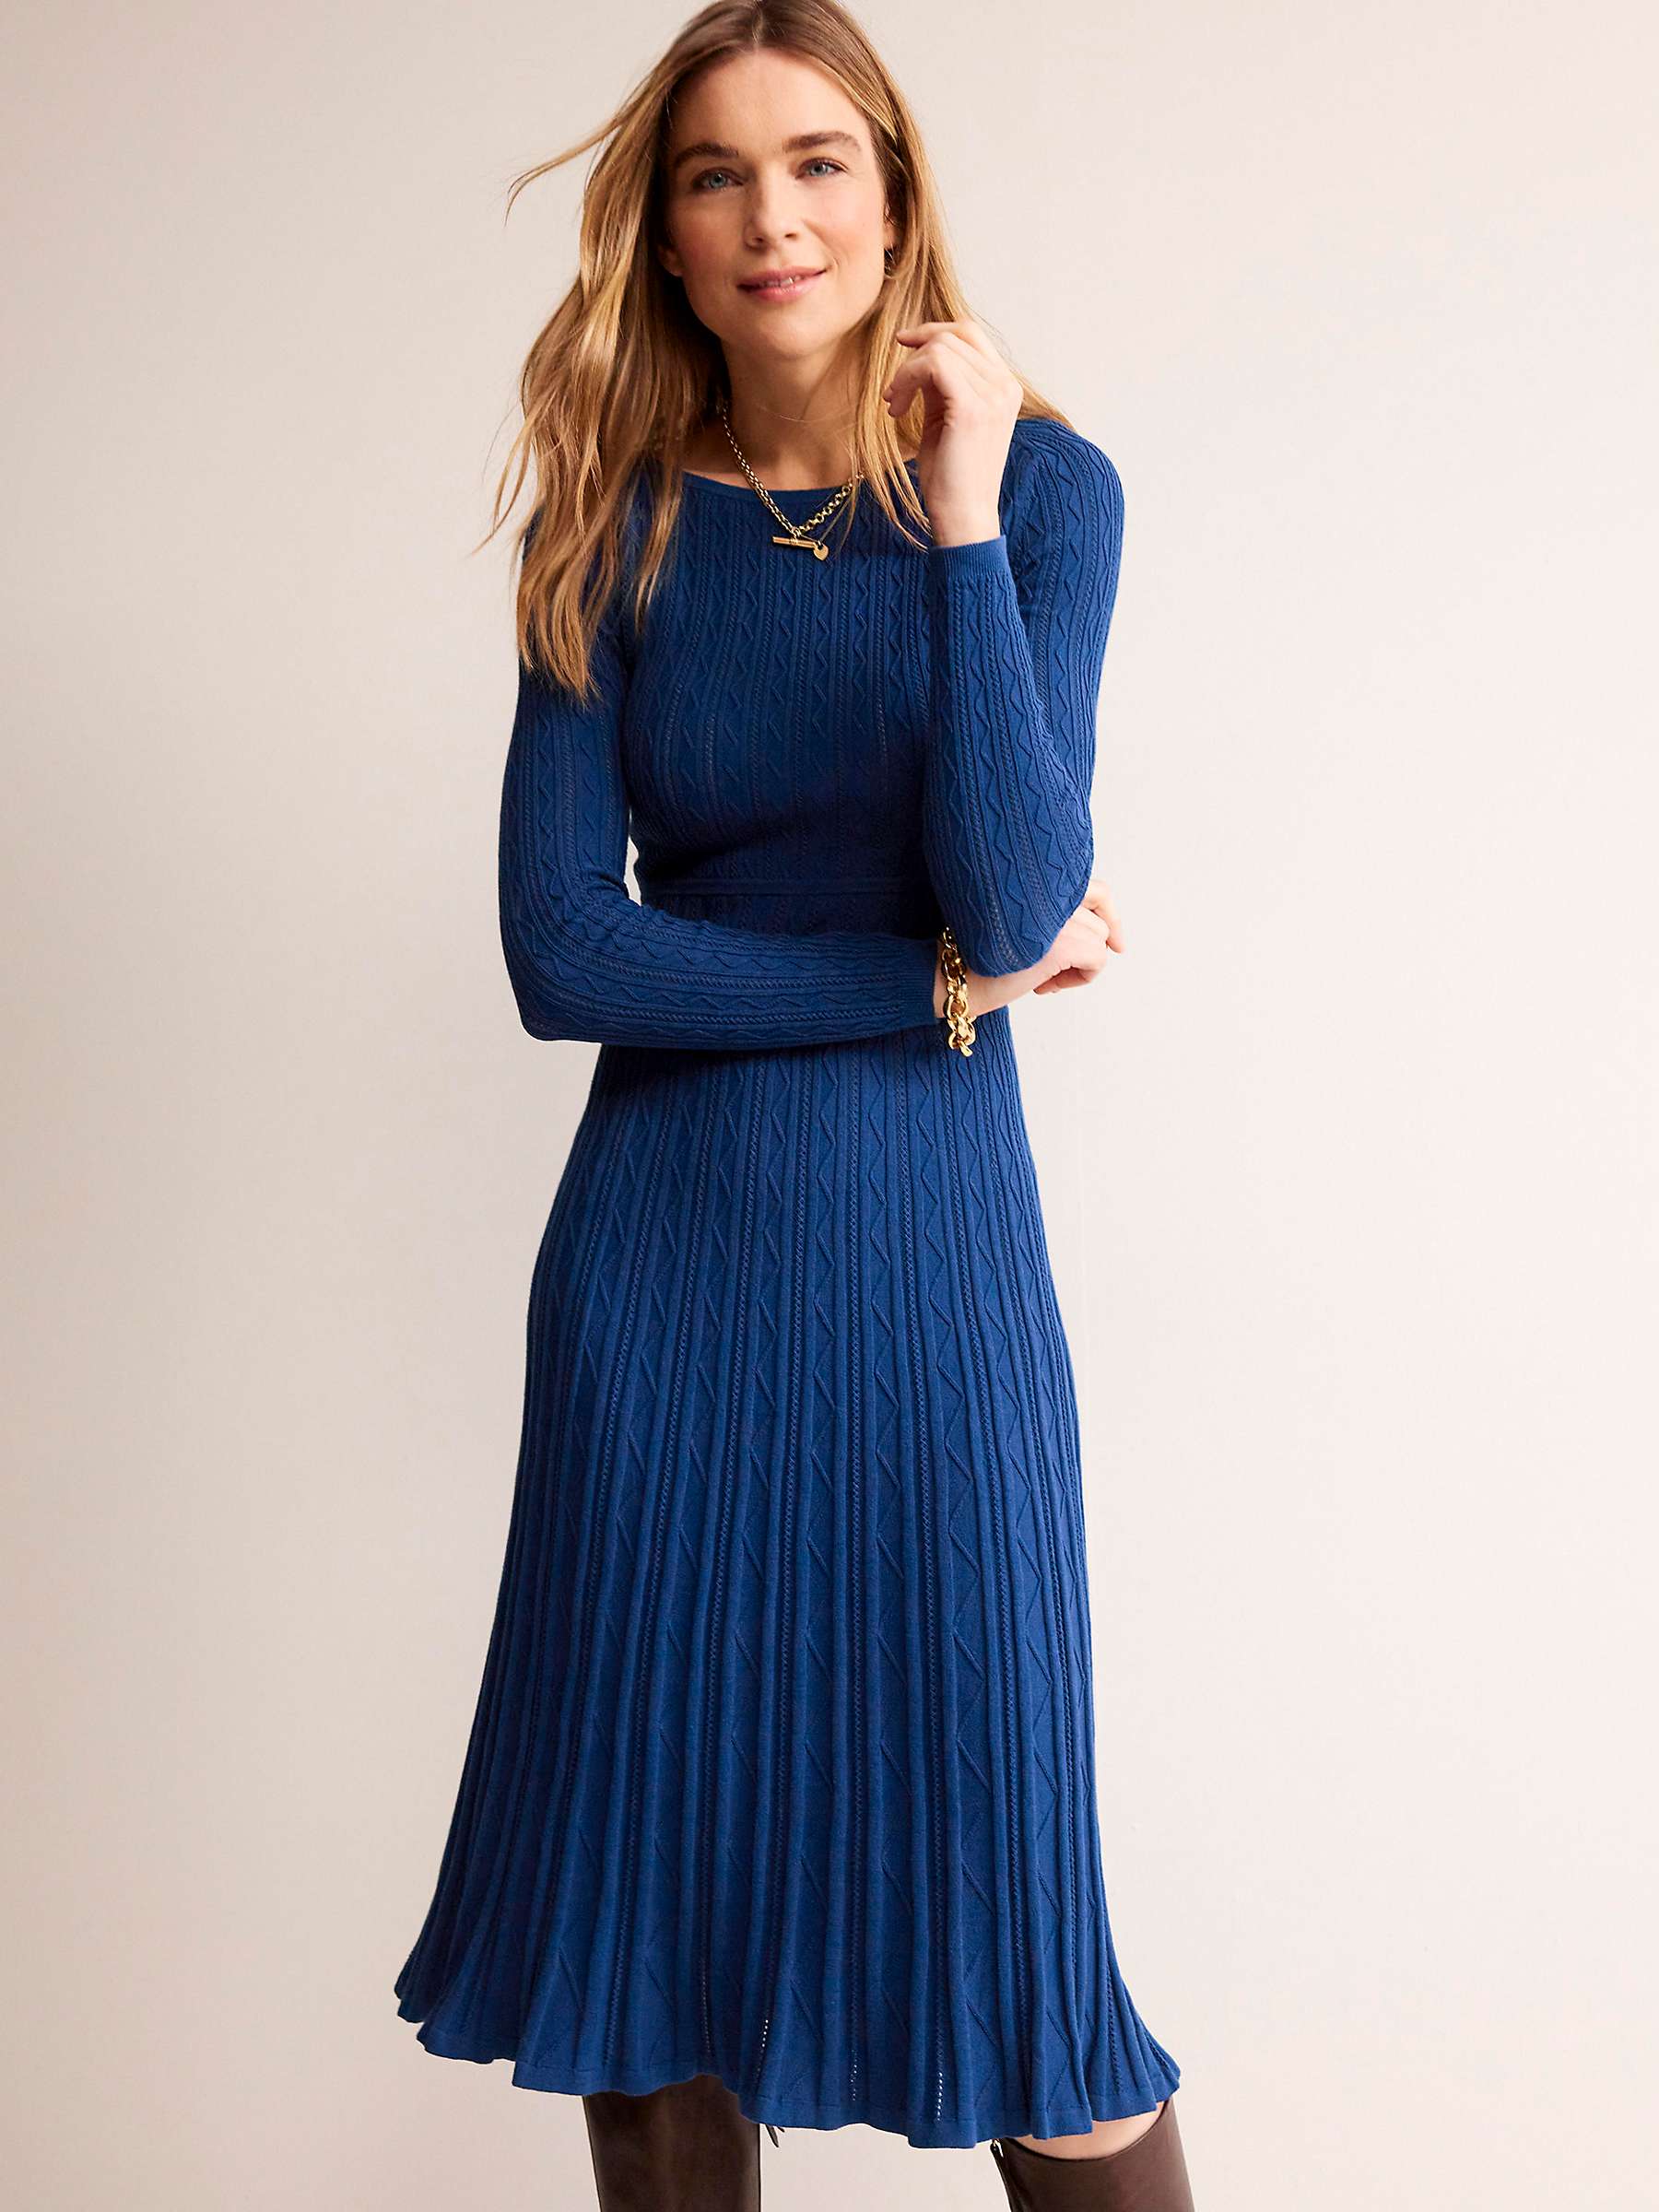 Buy Boden Imogen Cable Knit Dress, Navy Peony Online at johnlewis.com